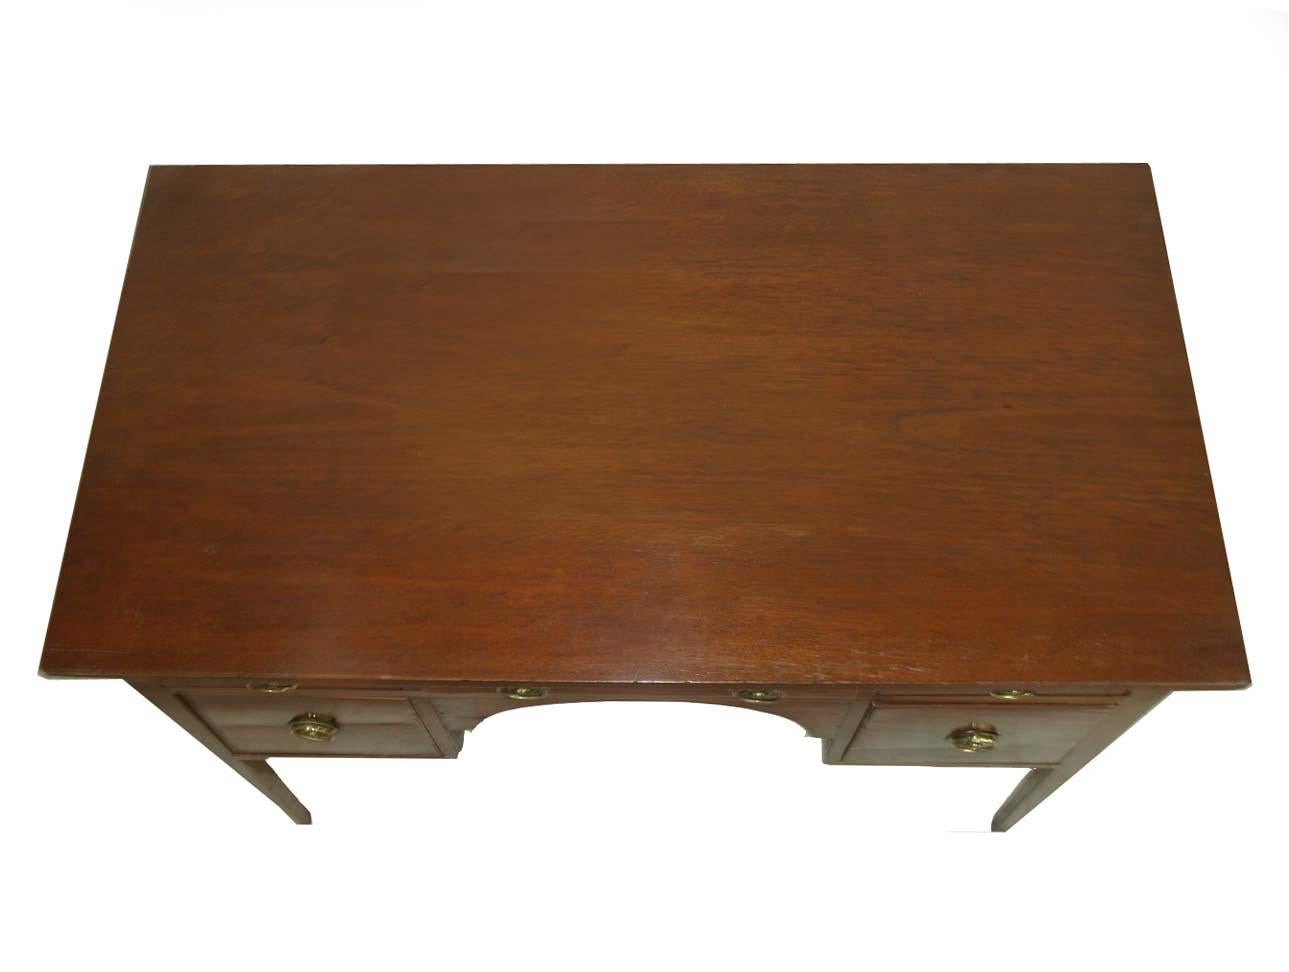 Hepplewhite Mahogany Server In Good Condition For Sale In Wilson, NC